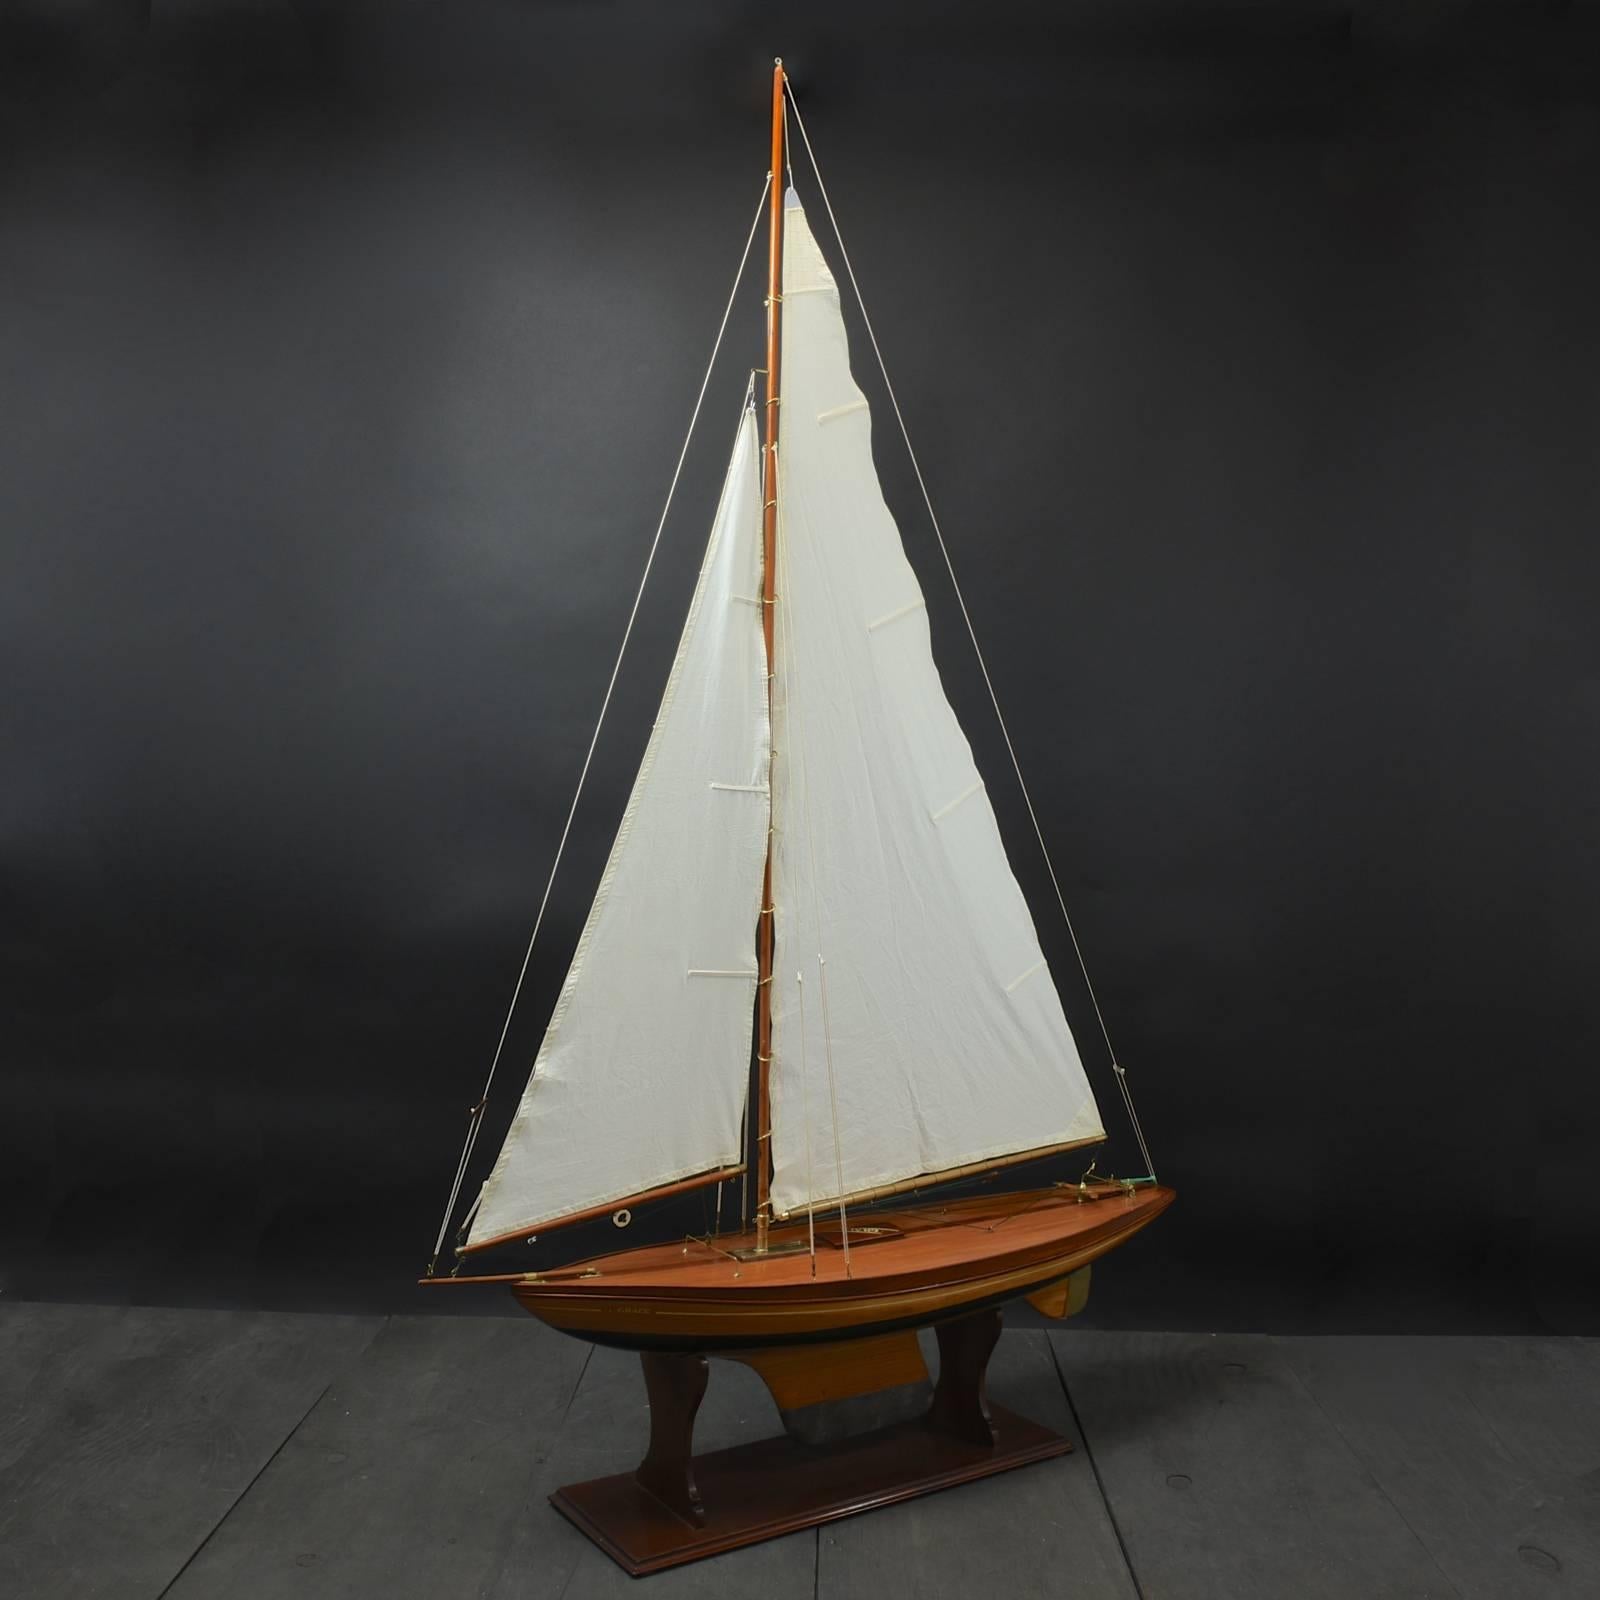 An elegant Bermudian rigged pond yacht named ‘Grace', circa 1935. Constructed with a part painted plank on frame hull, beautifully curved planked deck, brass rudder and a lead keel. The model utilizes a balanced main sail method of steering. The